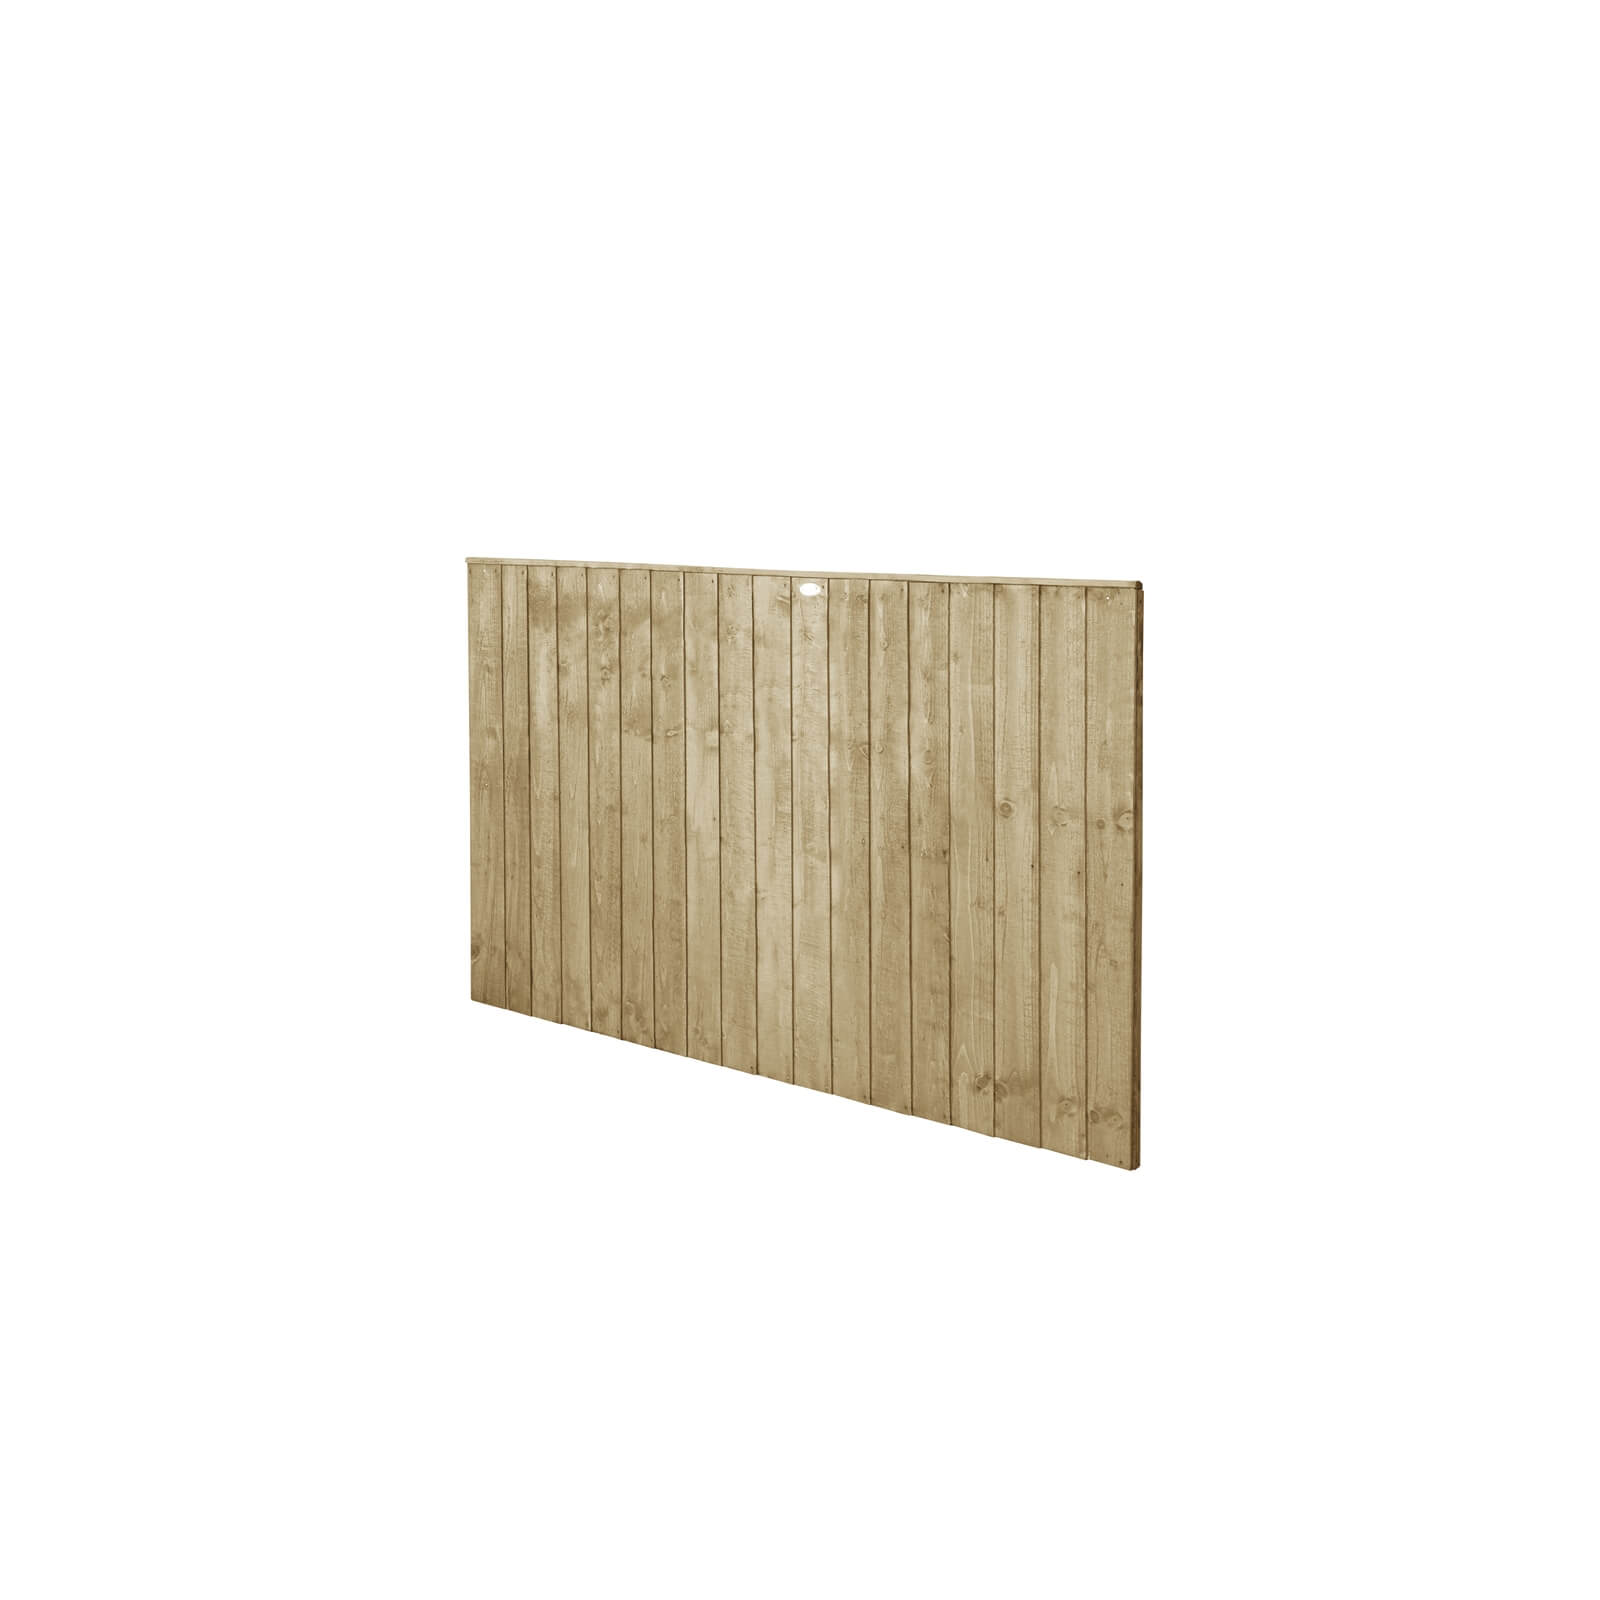 6ft x 4ft (1.83m x 1.23m) Pressure Treated Featheredge Fence Panel - Pack of 5